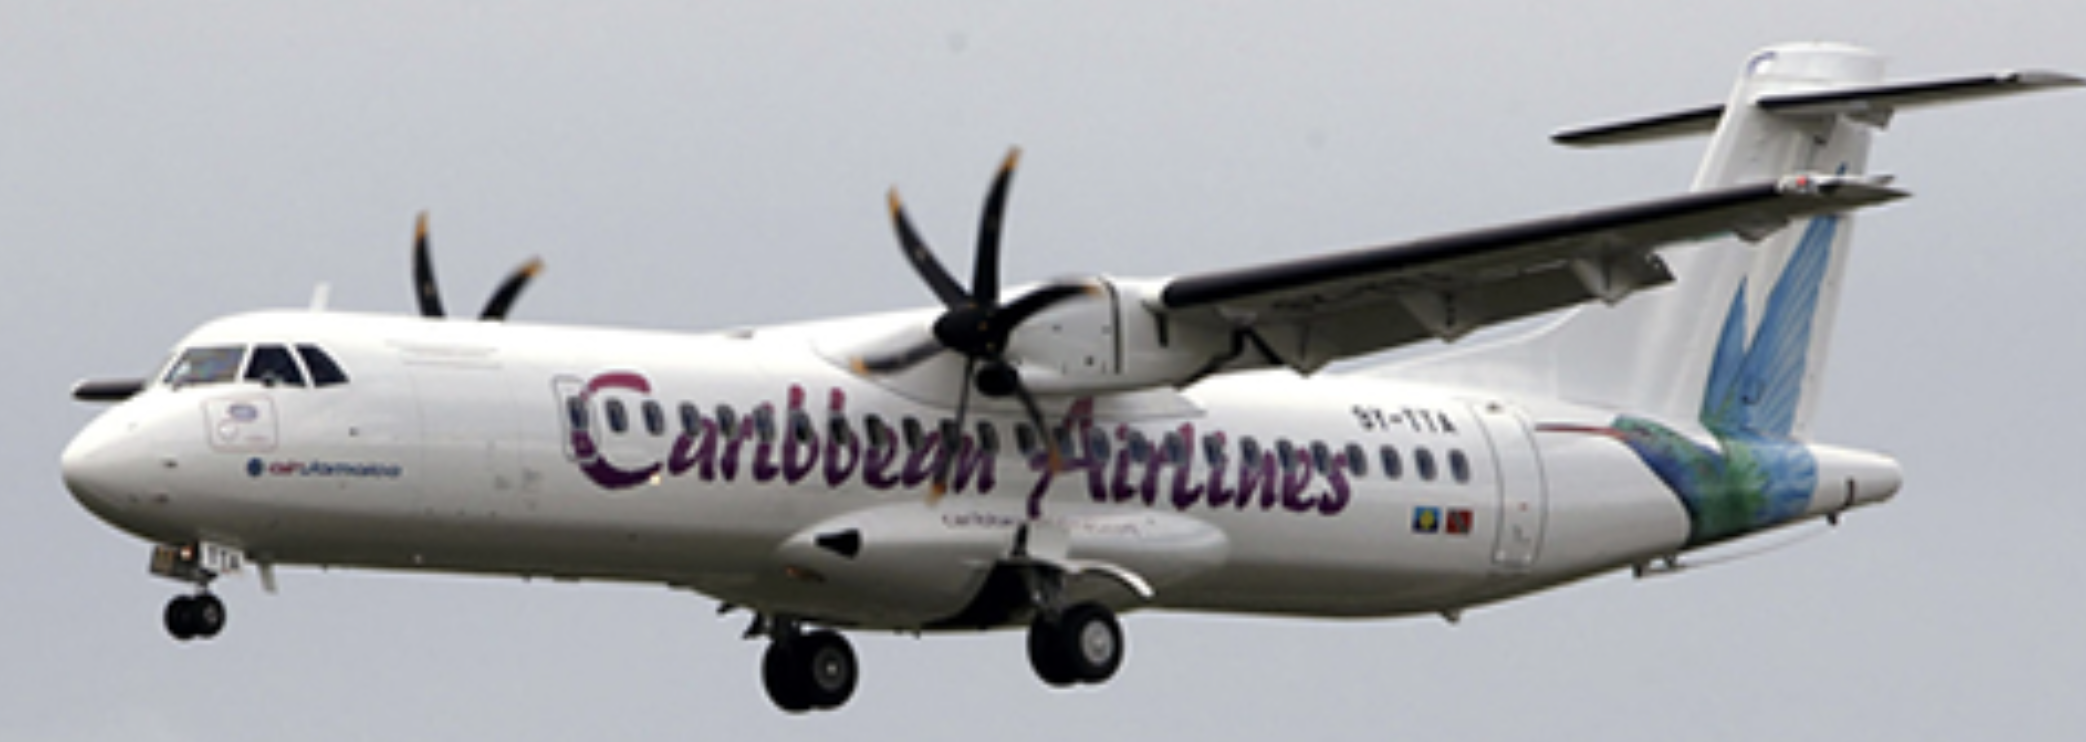 Caribbean Airlines Cargo launches charter service